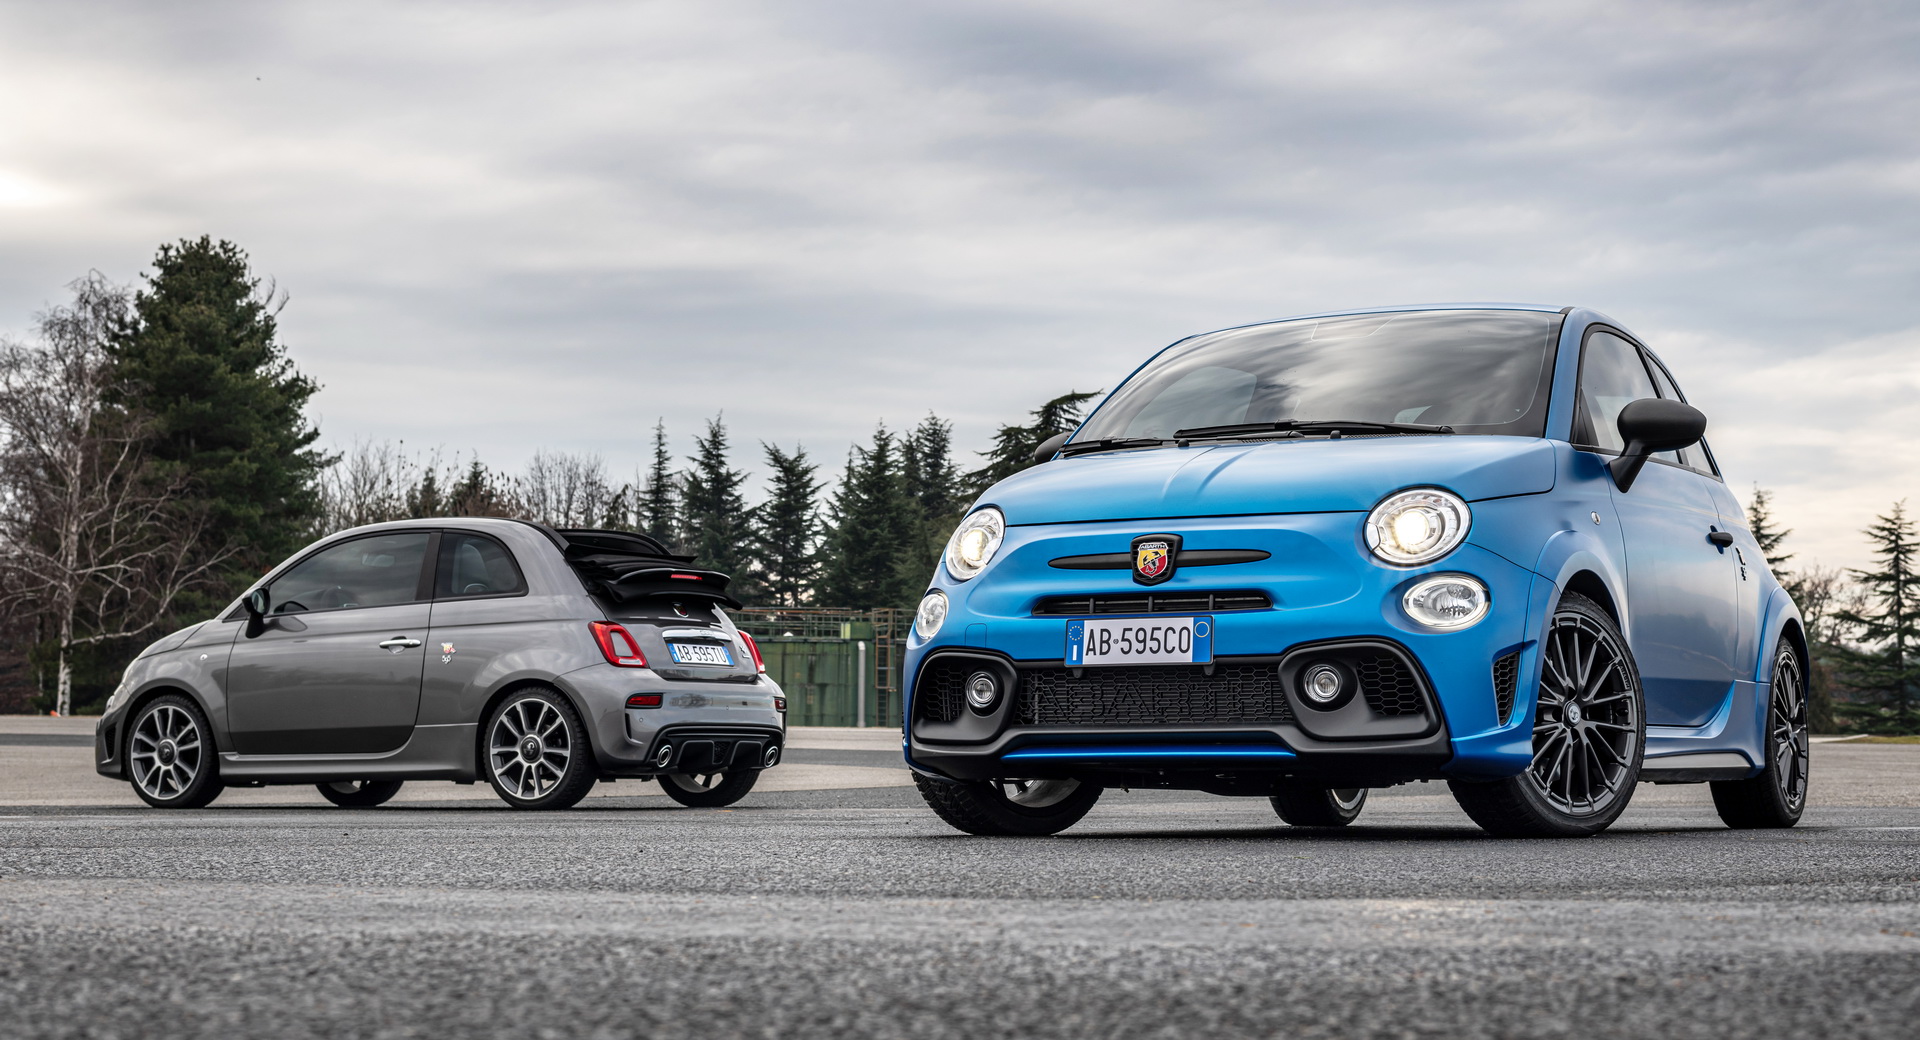 Fiat's Refreshed Abarth 595 Range Brings New Options And A 'Scorpion' Mode